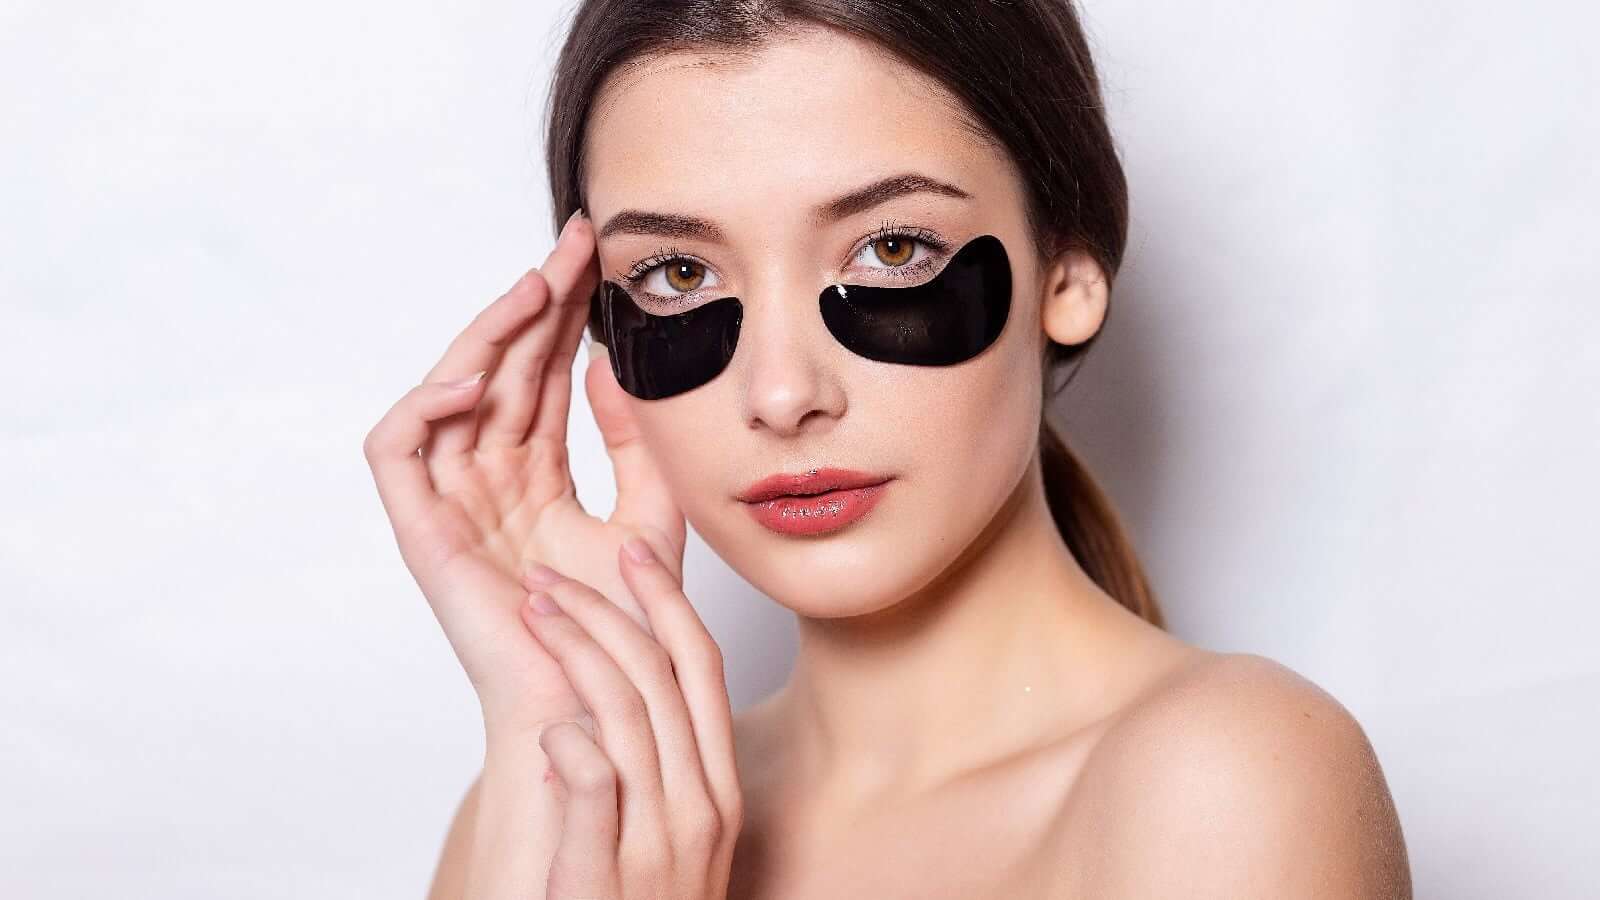 How to treat puffy eyes at home?